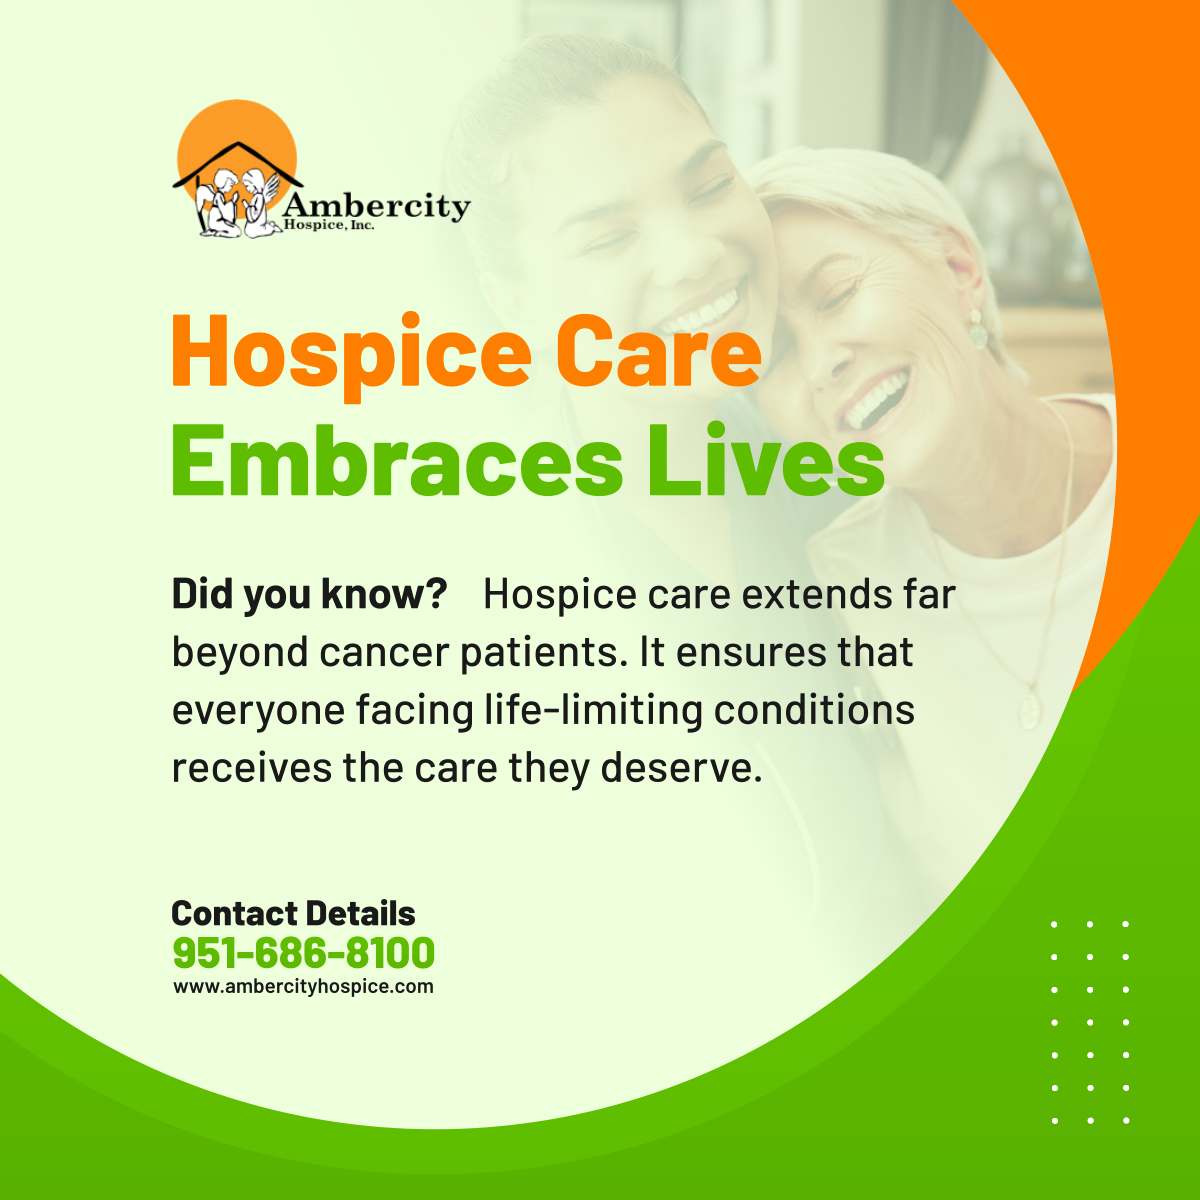 We're here to provide comfort, and symptom management, and enhance the quality of life for those who have decided to shift their focus from pursuing a cure. 

#SpecializedCare #LifeLimitingConditions #EndOfLifeCare